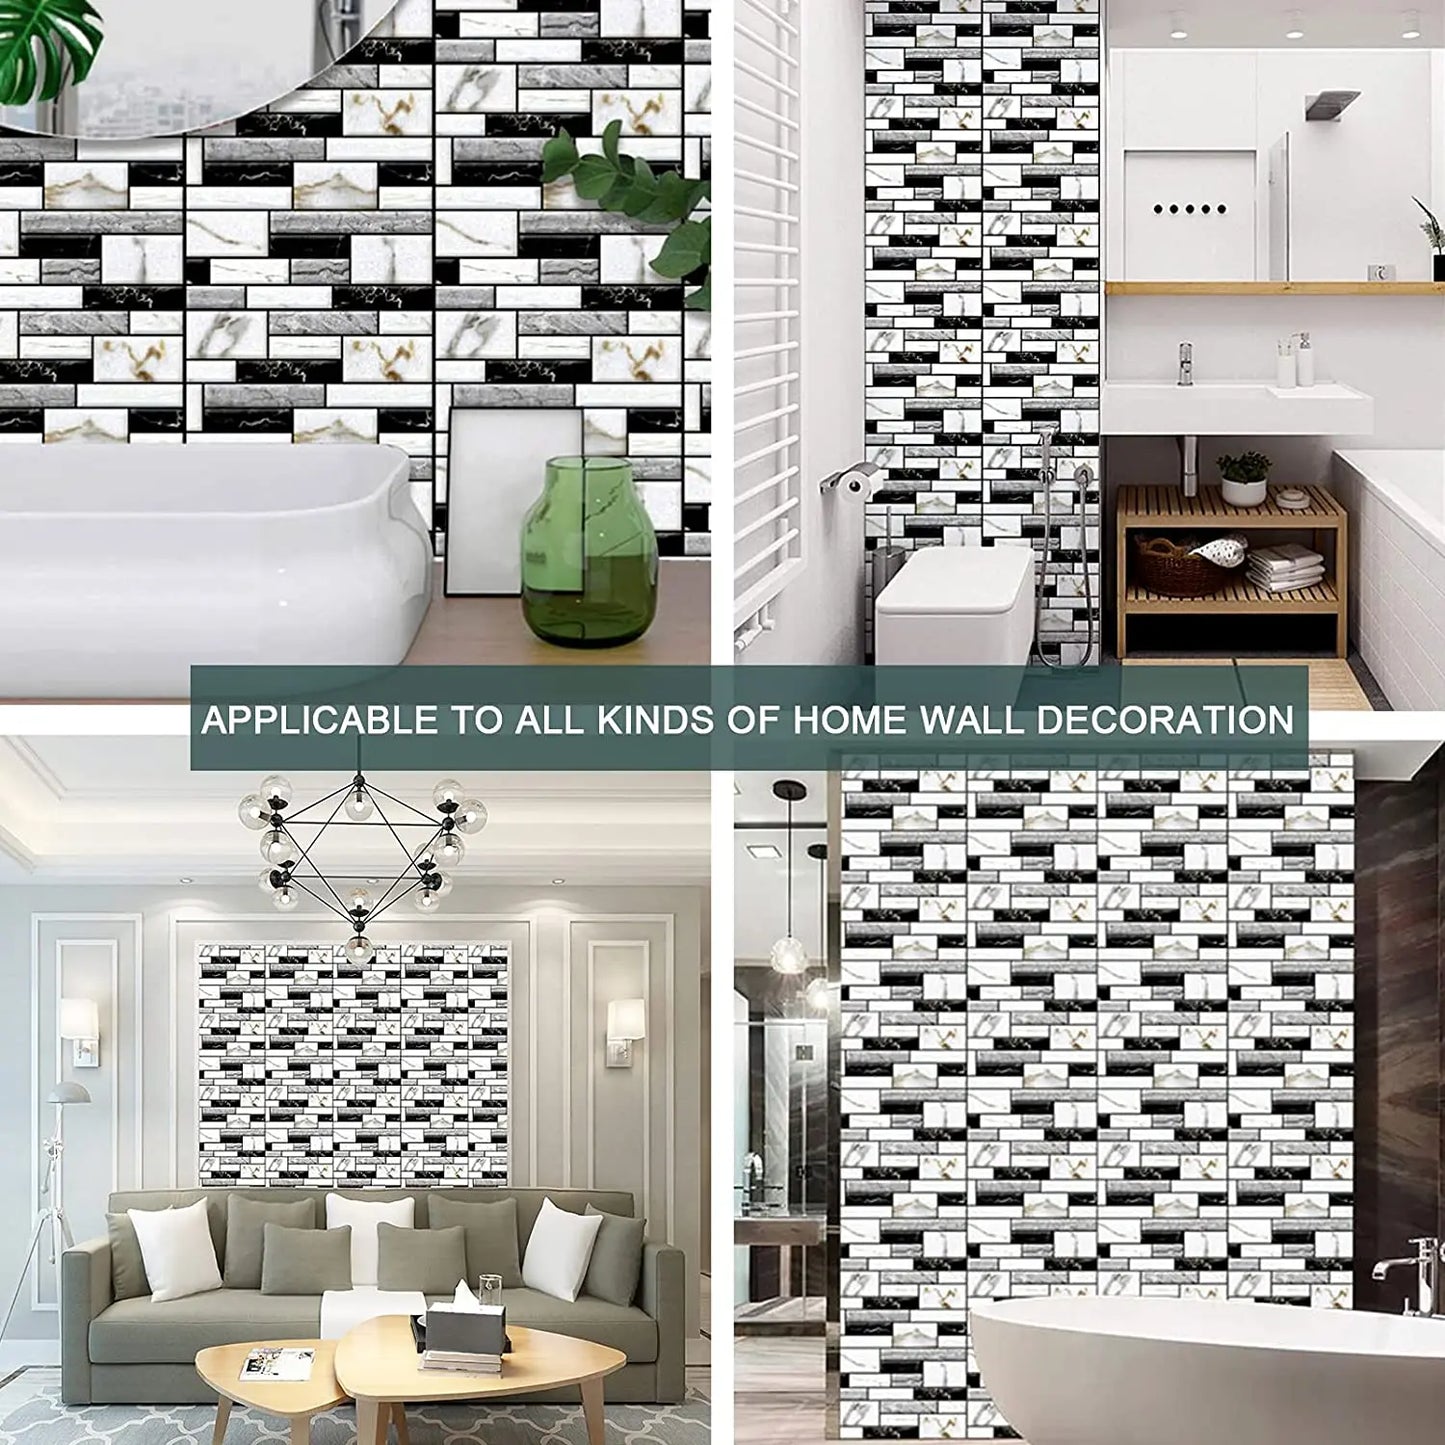 Self Adhesive Tile Wall Sticker Home Decor 3D PVC sticker Covers For Kitchen Cupboard Bathroom Waterproof Wallpaper